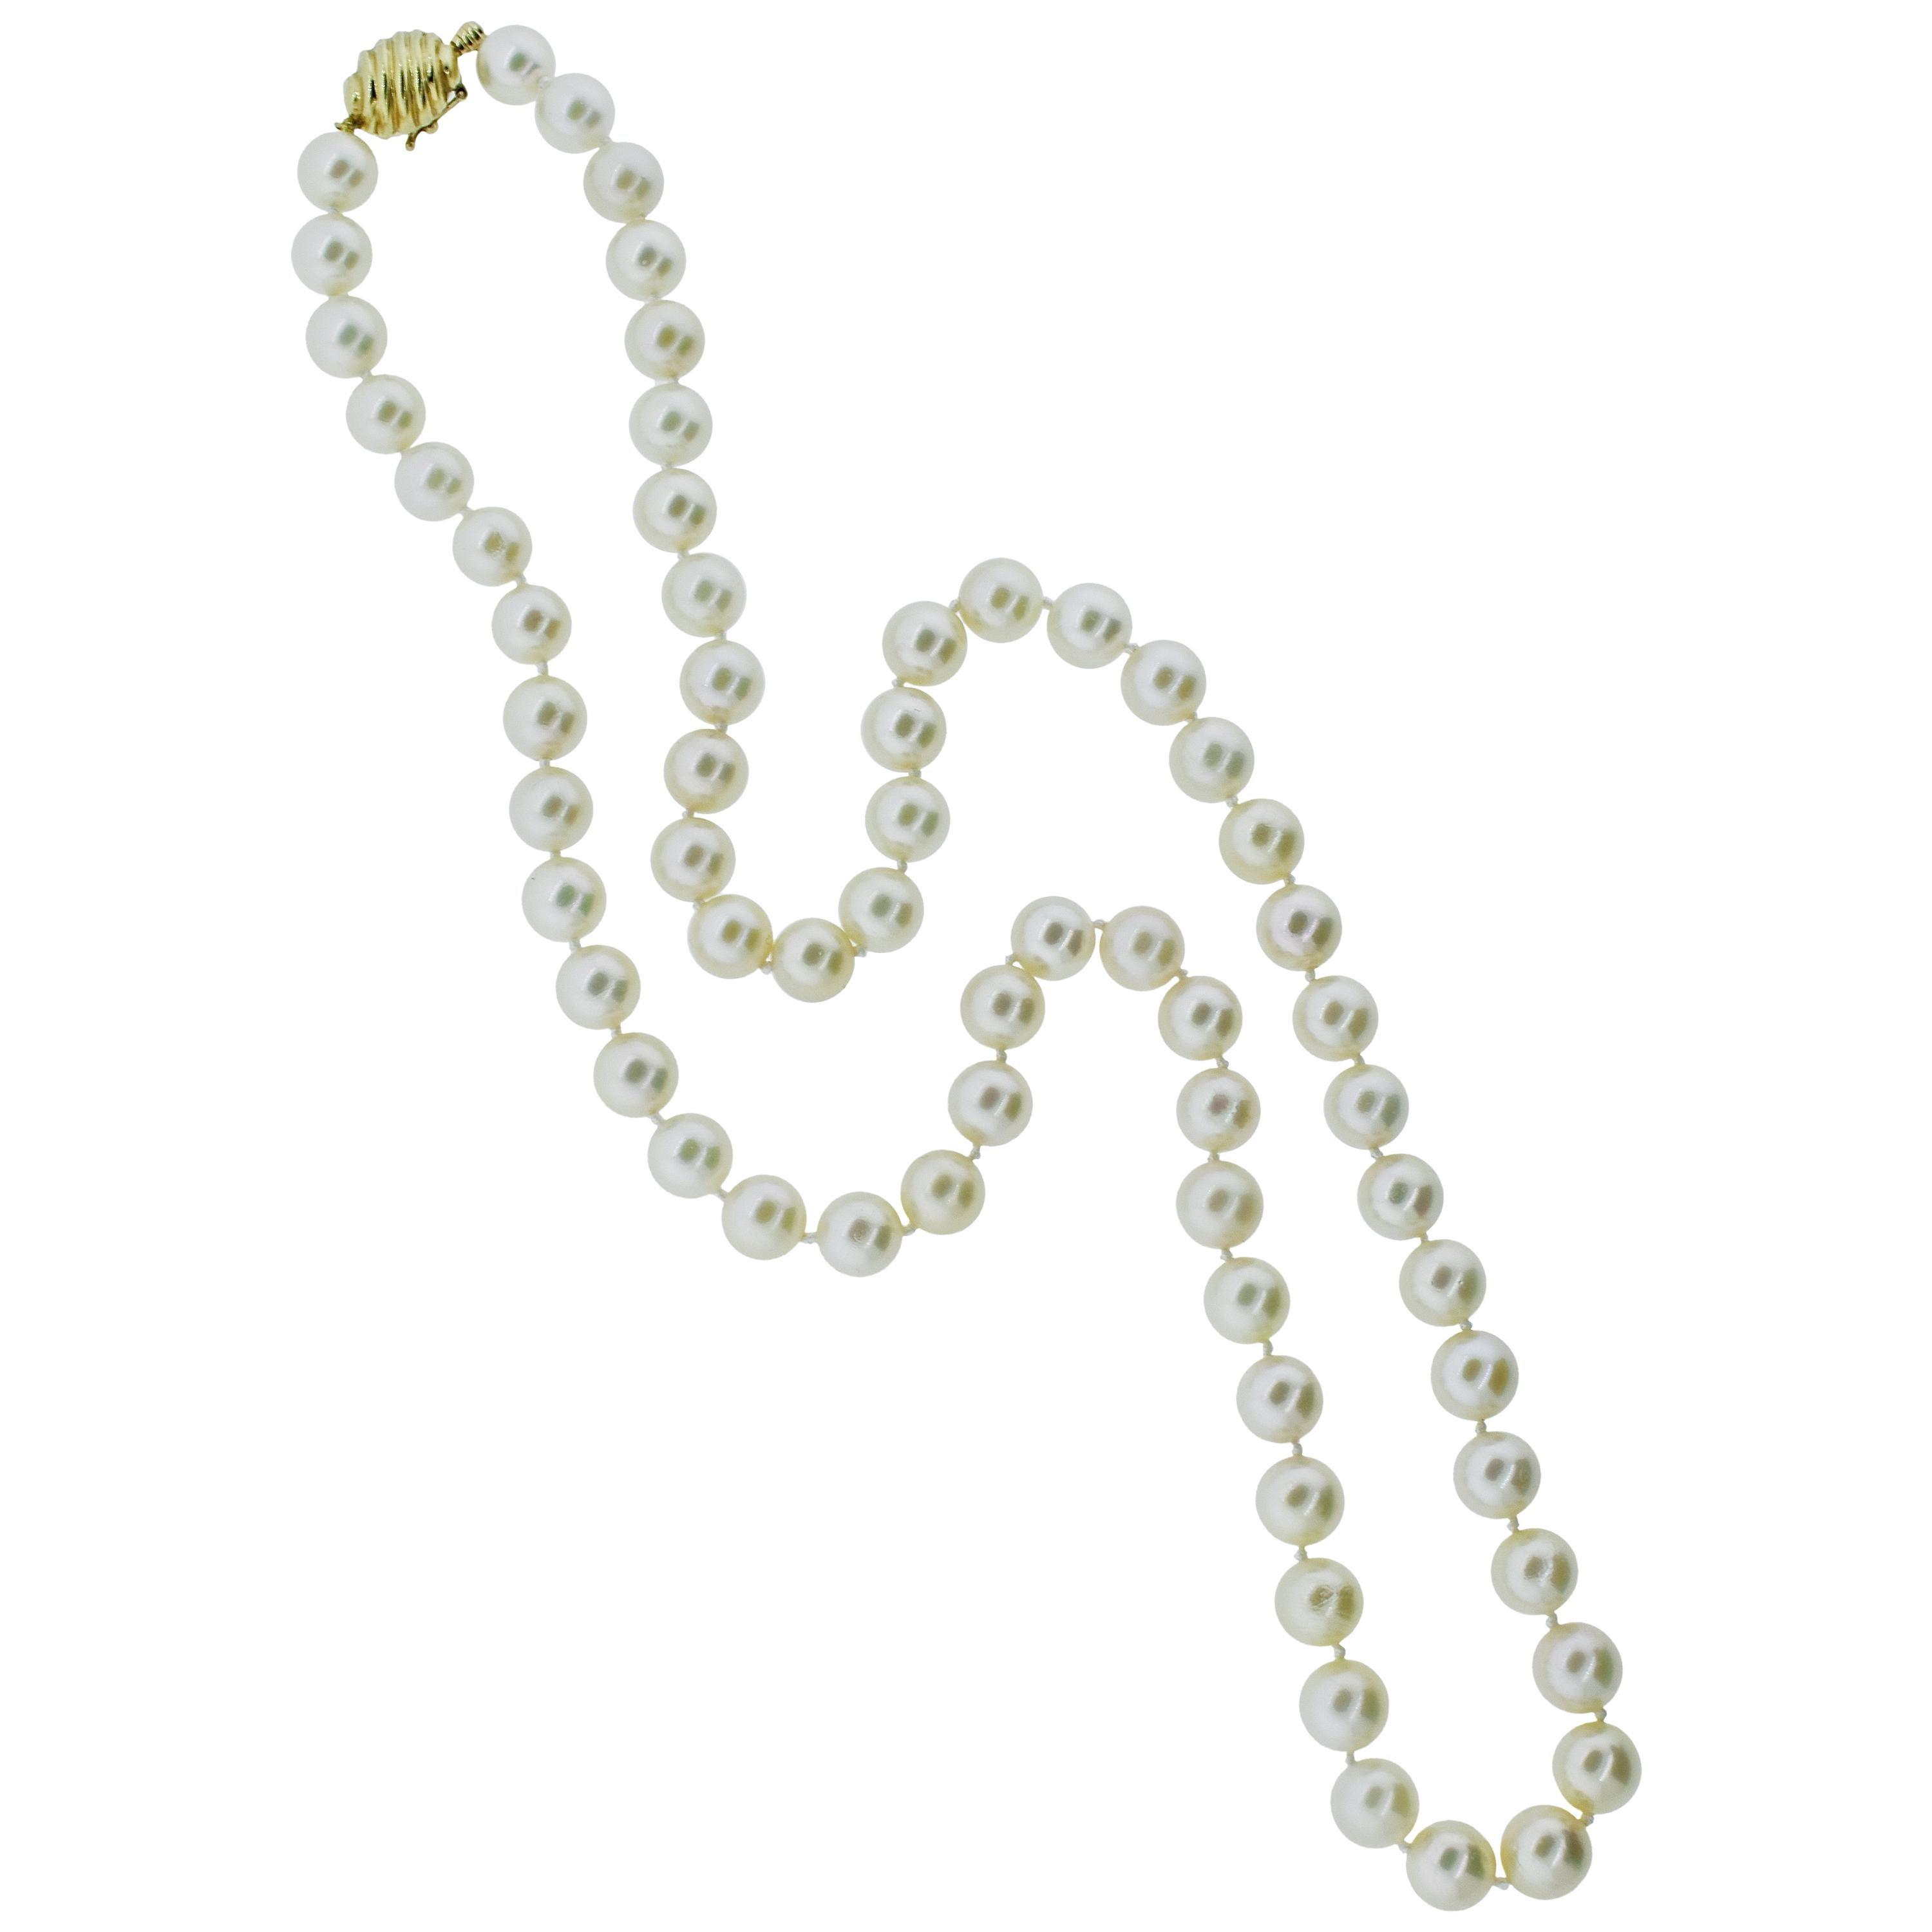 Strand of Large Fine Cultured Pearls